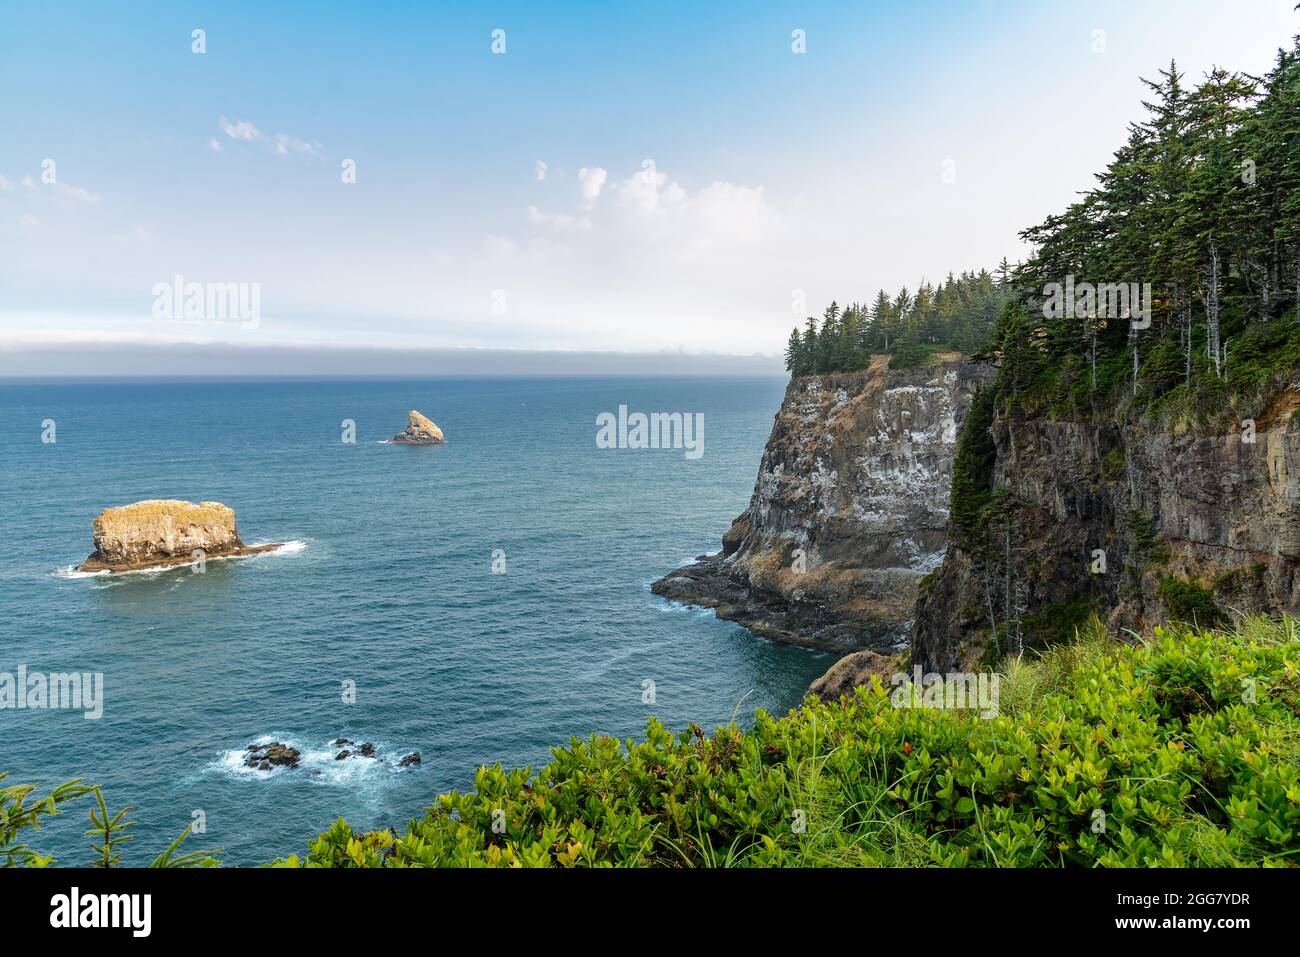 Felsklippe am Cape Meares State Scenic Viewpoint. Tallimook, Oregon, USA. Stockfoto